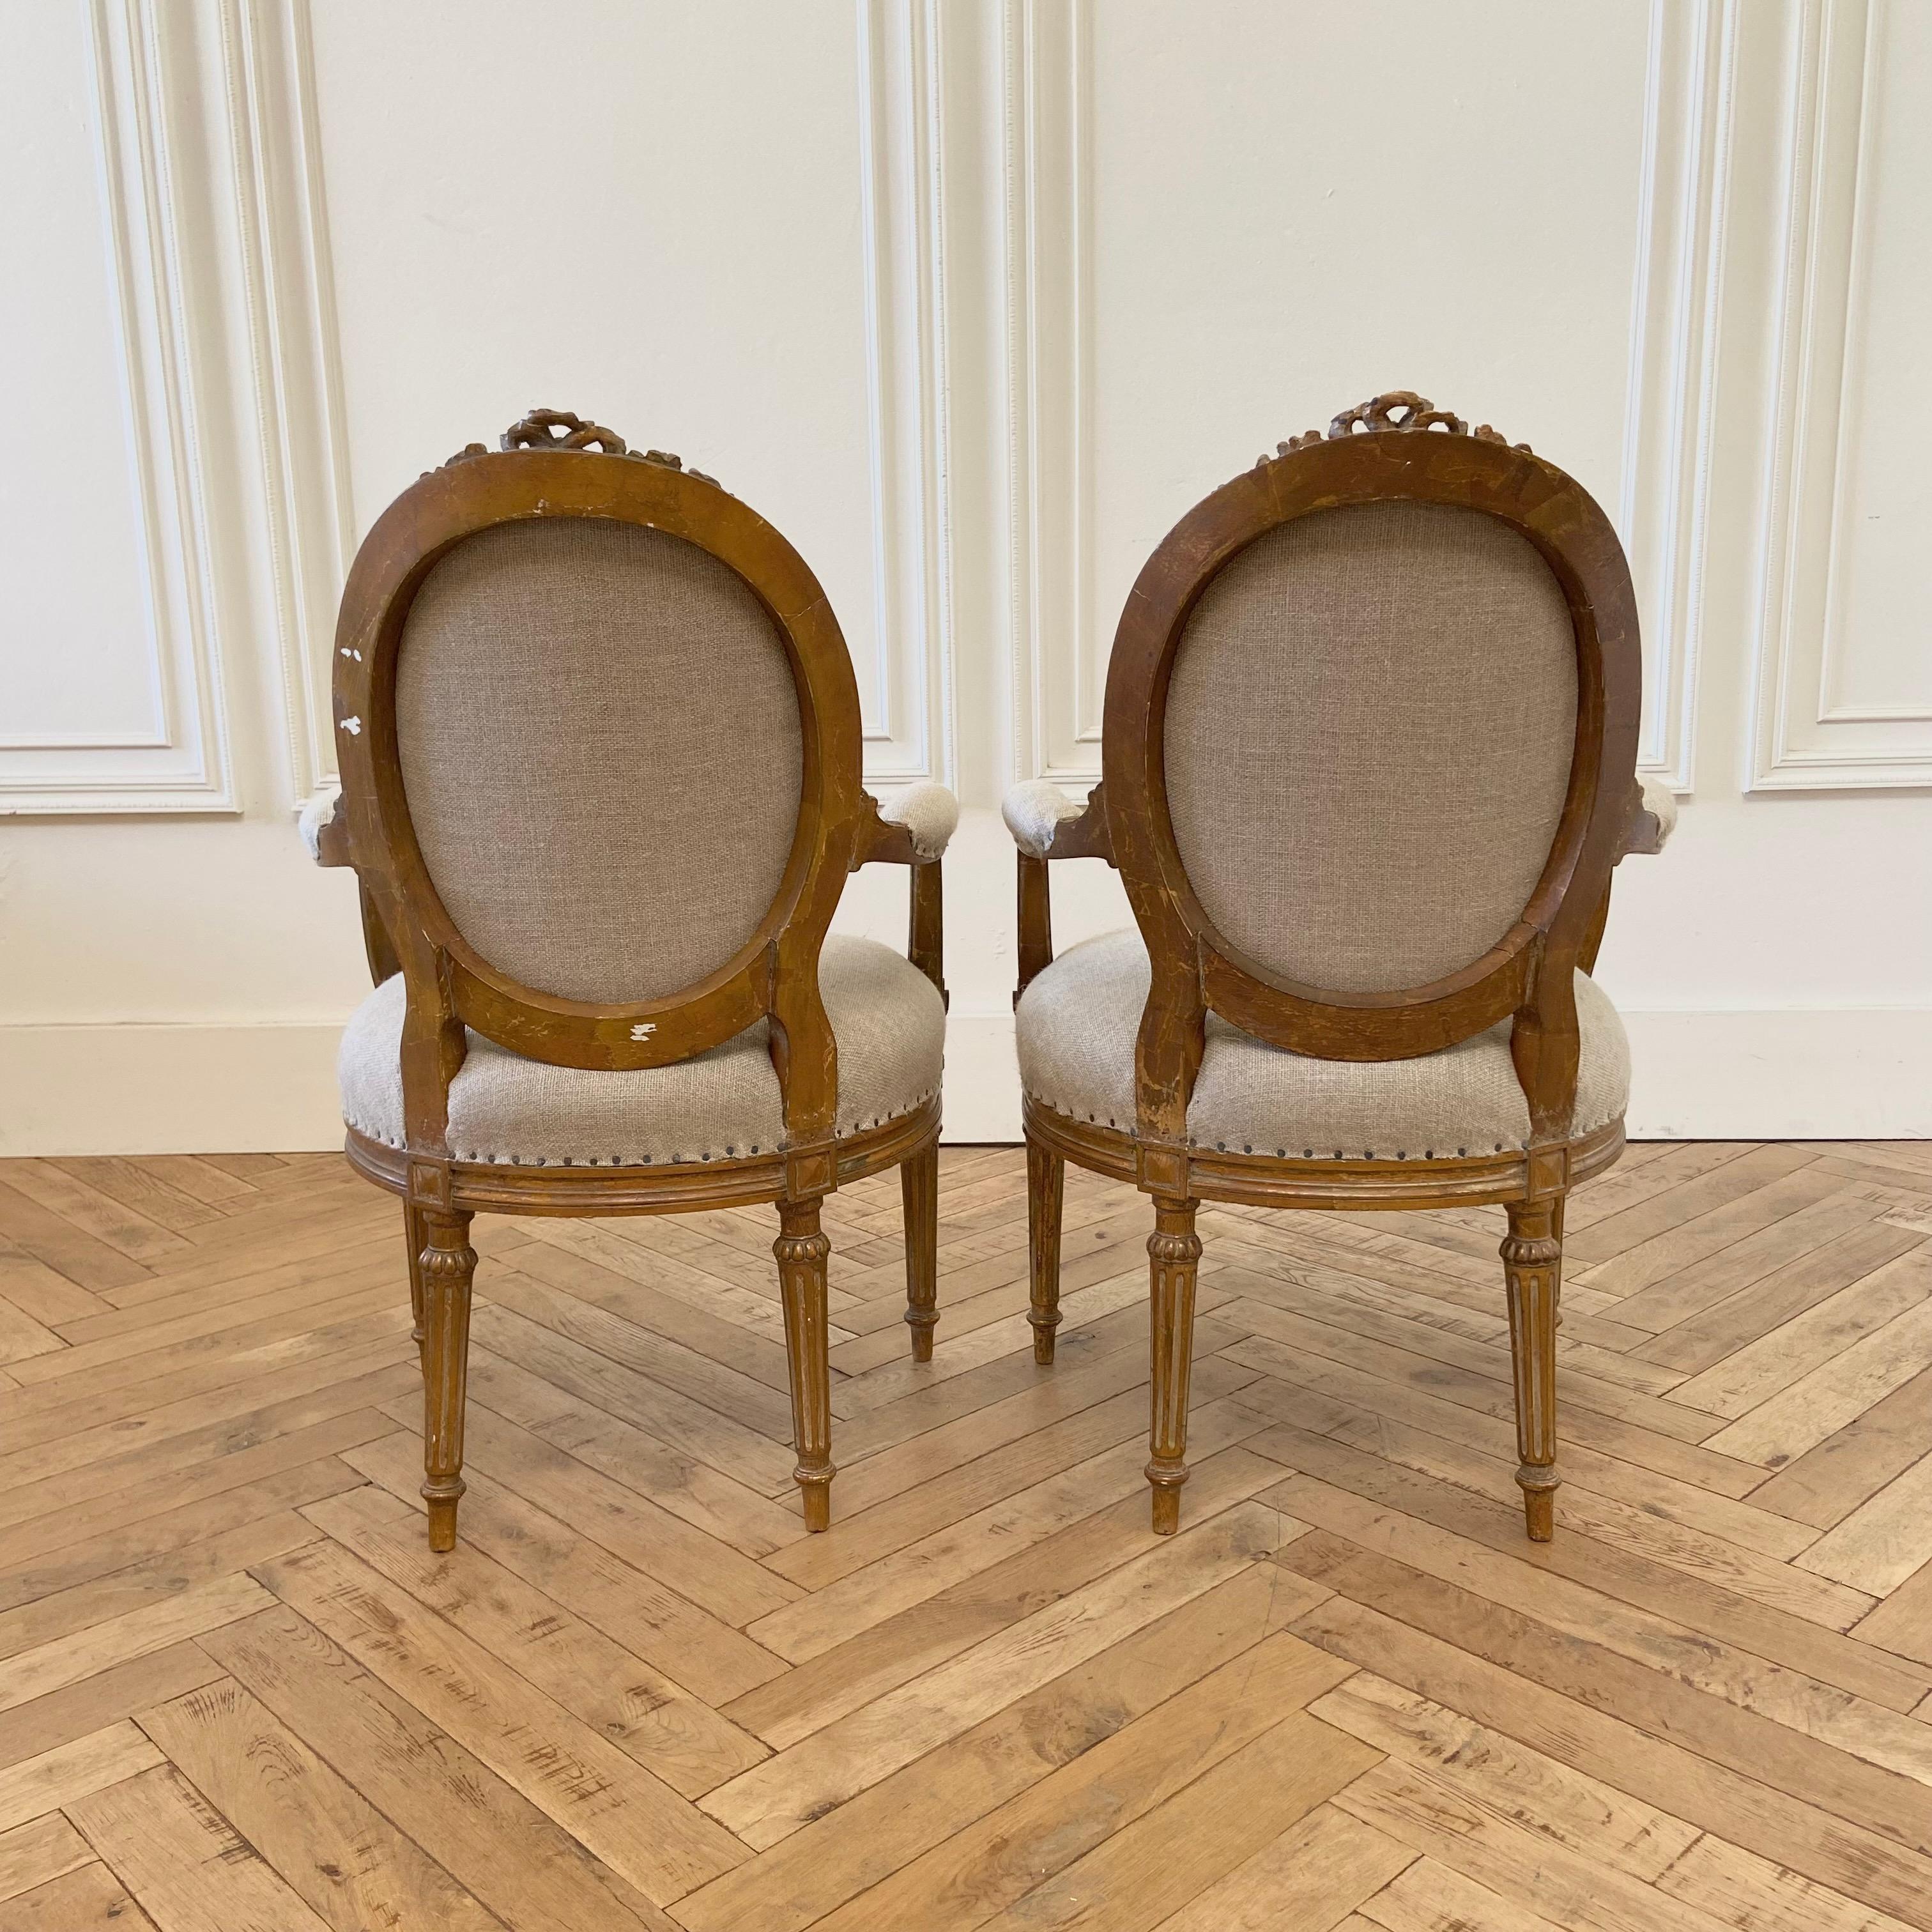 Abalone Antique Pair of Gilt Wood Open Arm Chairs Upholstered in Natural Linen For Sale